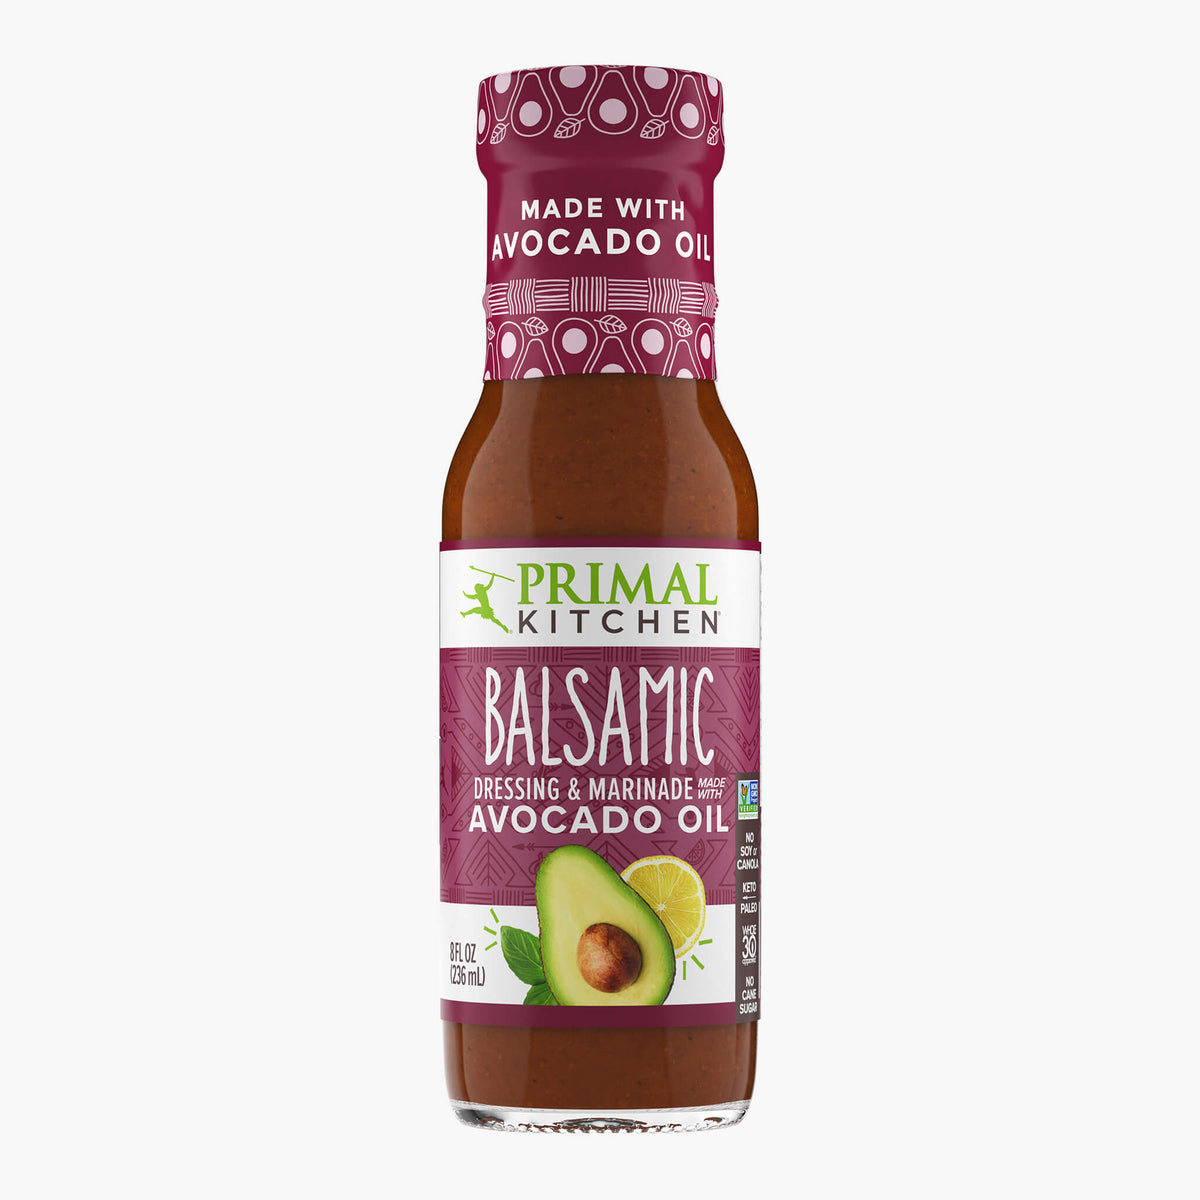 A bottle of Primal Kitchen Balsamic Dressing and Marinade made with avocado oil, with a wine colored label, on a light grey background. 